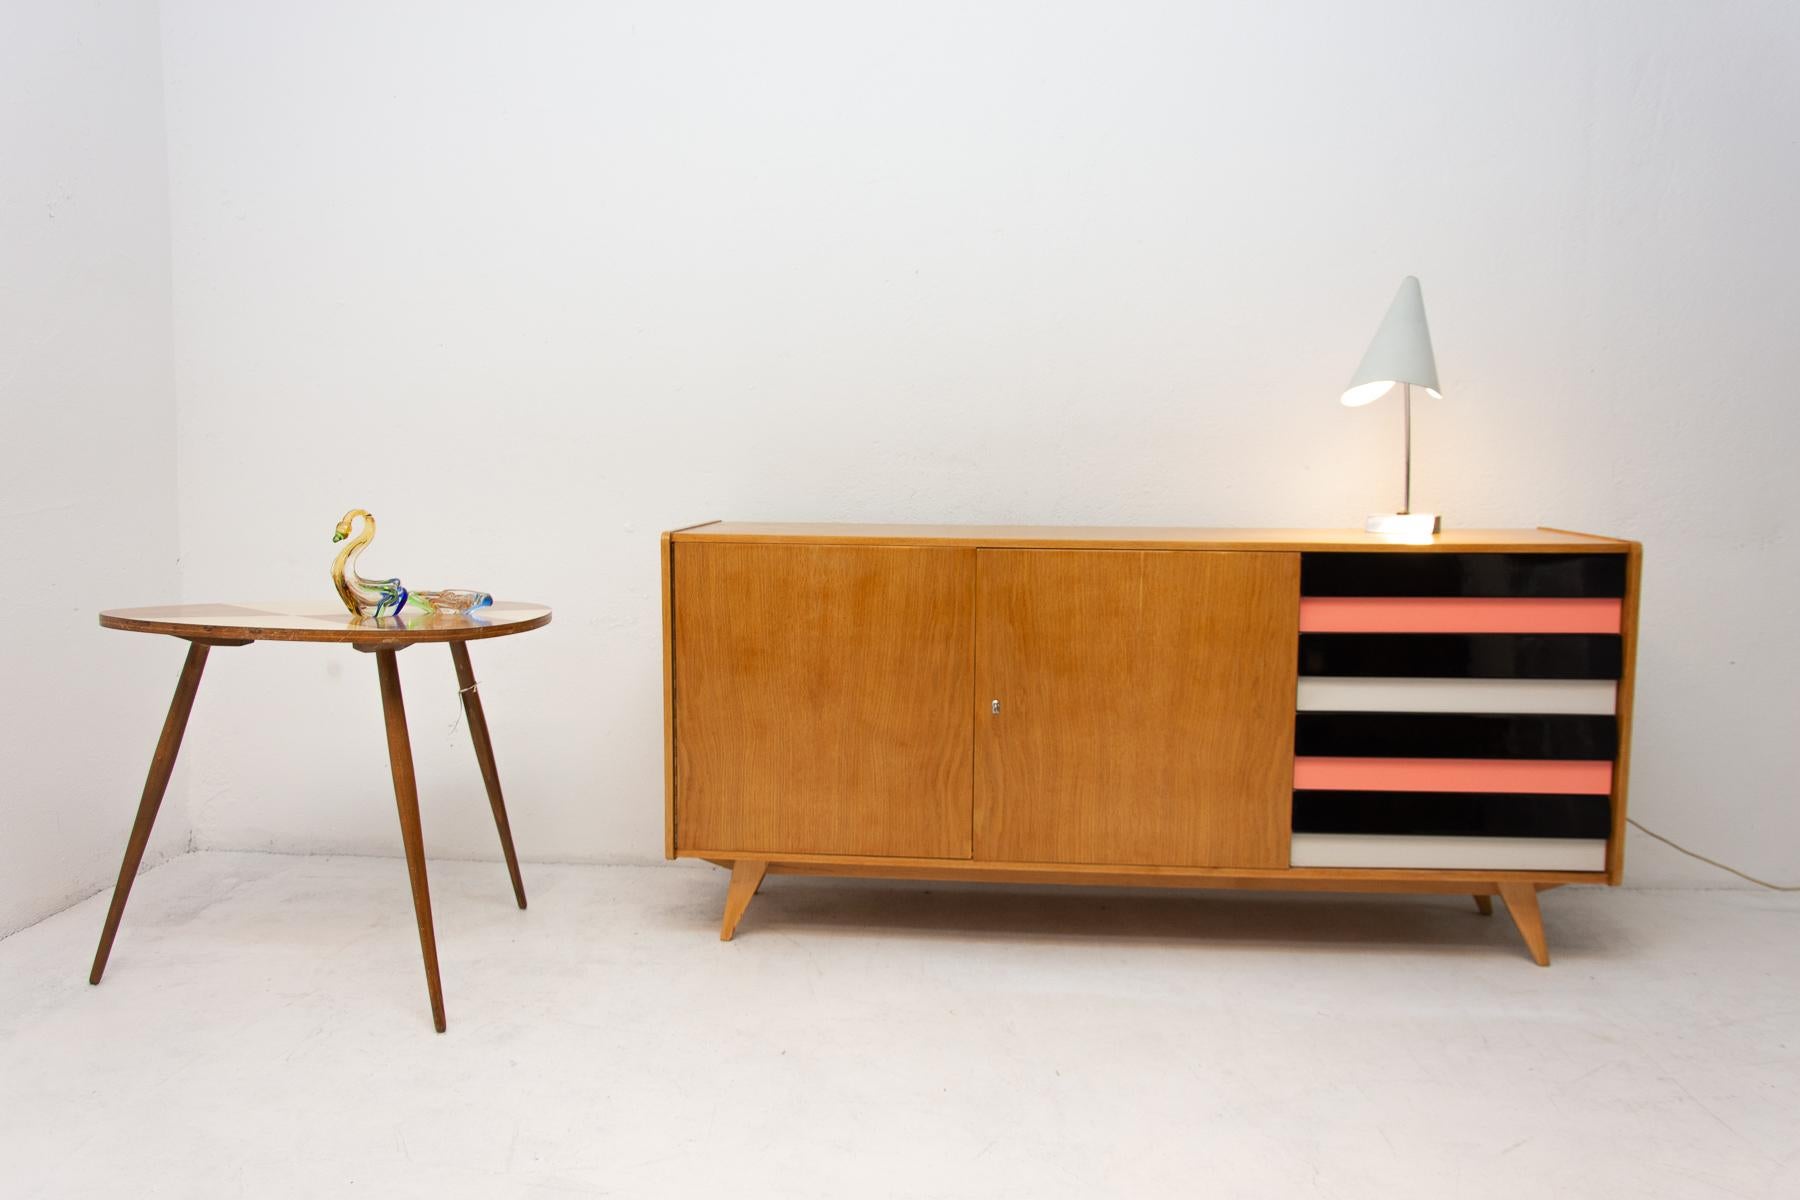 A popular vintage sideboard model U-460 from the 1960´s. It was designed by Jiri Jiroutek for Interier Praha. It features a beech wood, plywood, colored lacquered drawers. In excellent condition, fully refurbished.
   